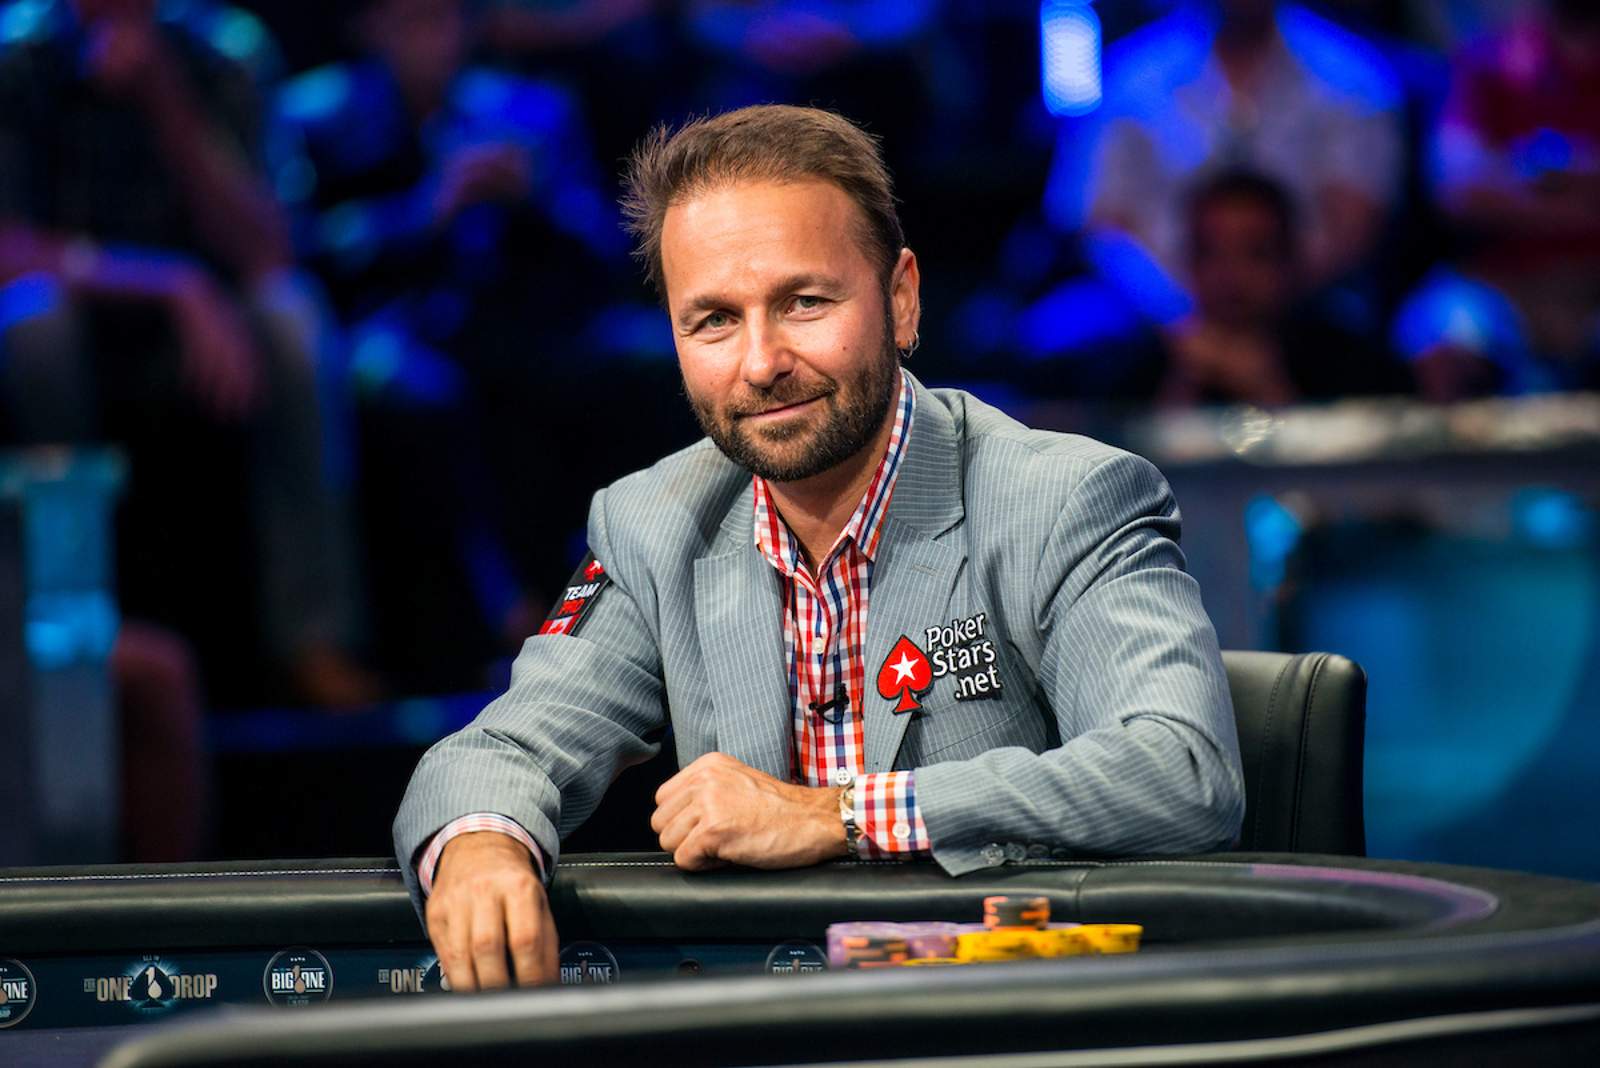 Daniel Negreanu on Private Games and Celebs